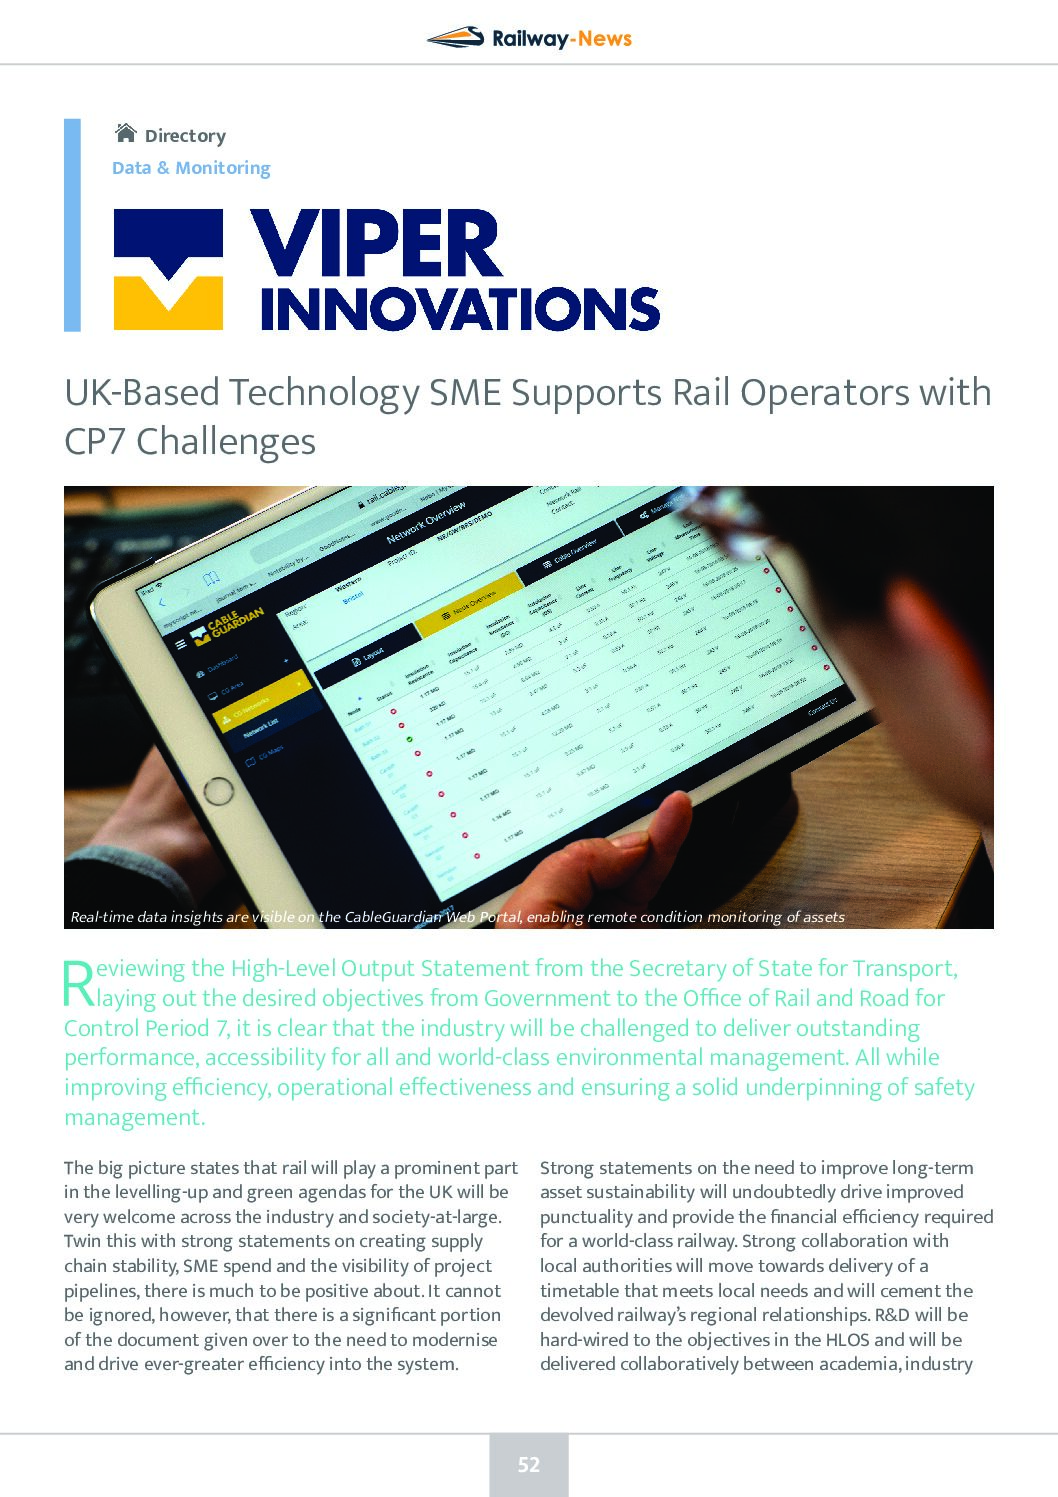 UK-Based SME Supports Rail Operators with CP7 Challenges